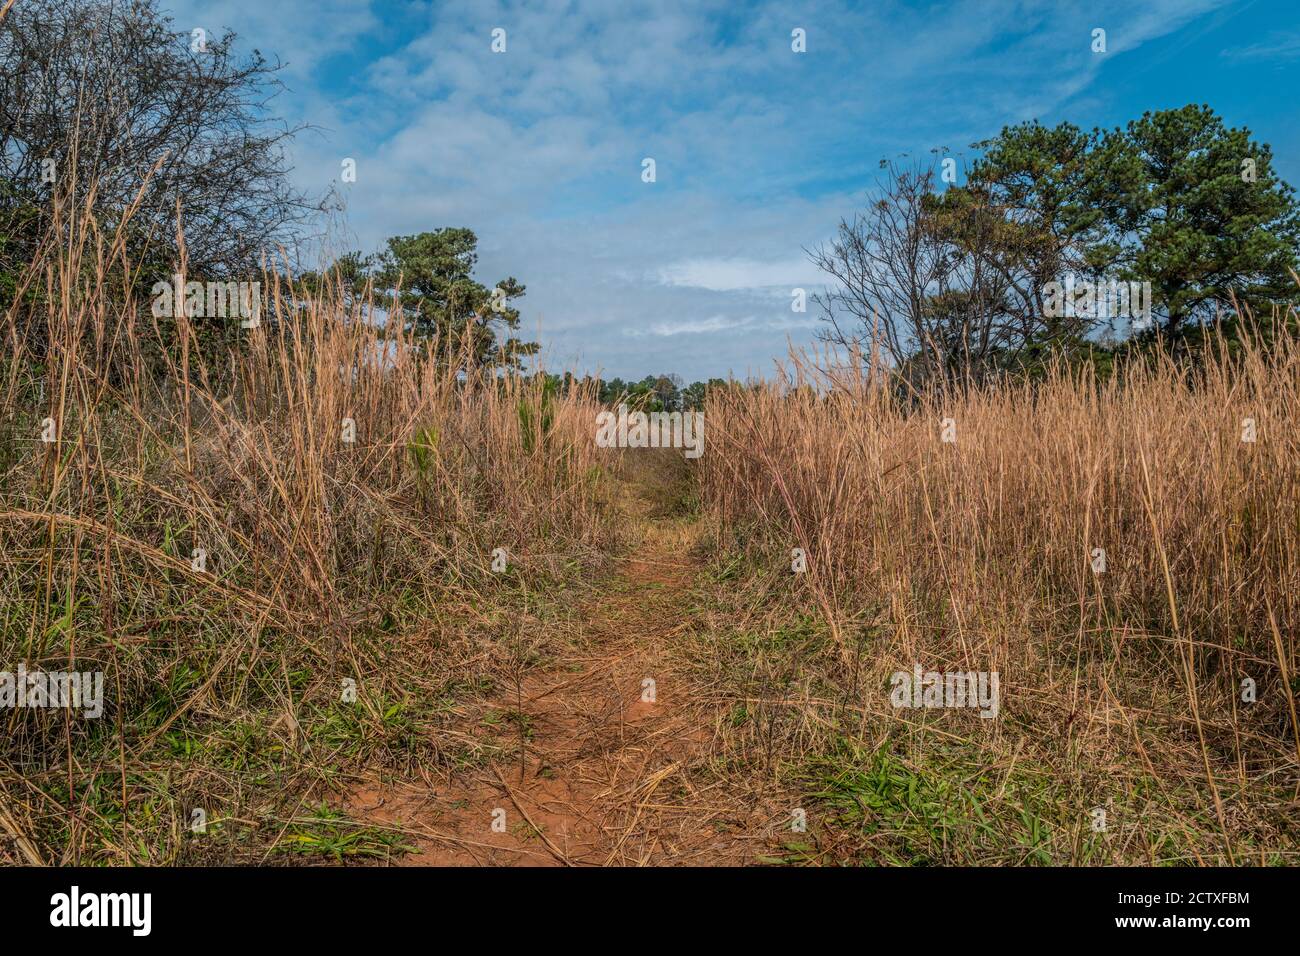 Thick lush field of dried tall grasses growing along the trails that lead into the woodlands in the background on a bright sunny day in autumn Stock Photo